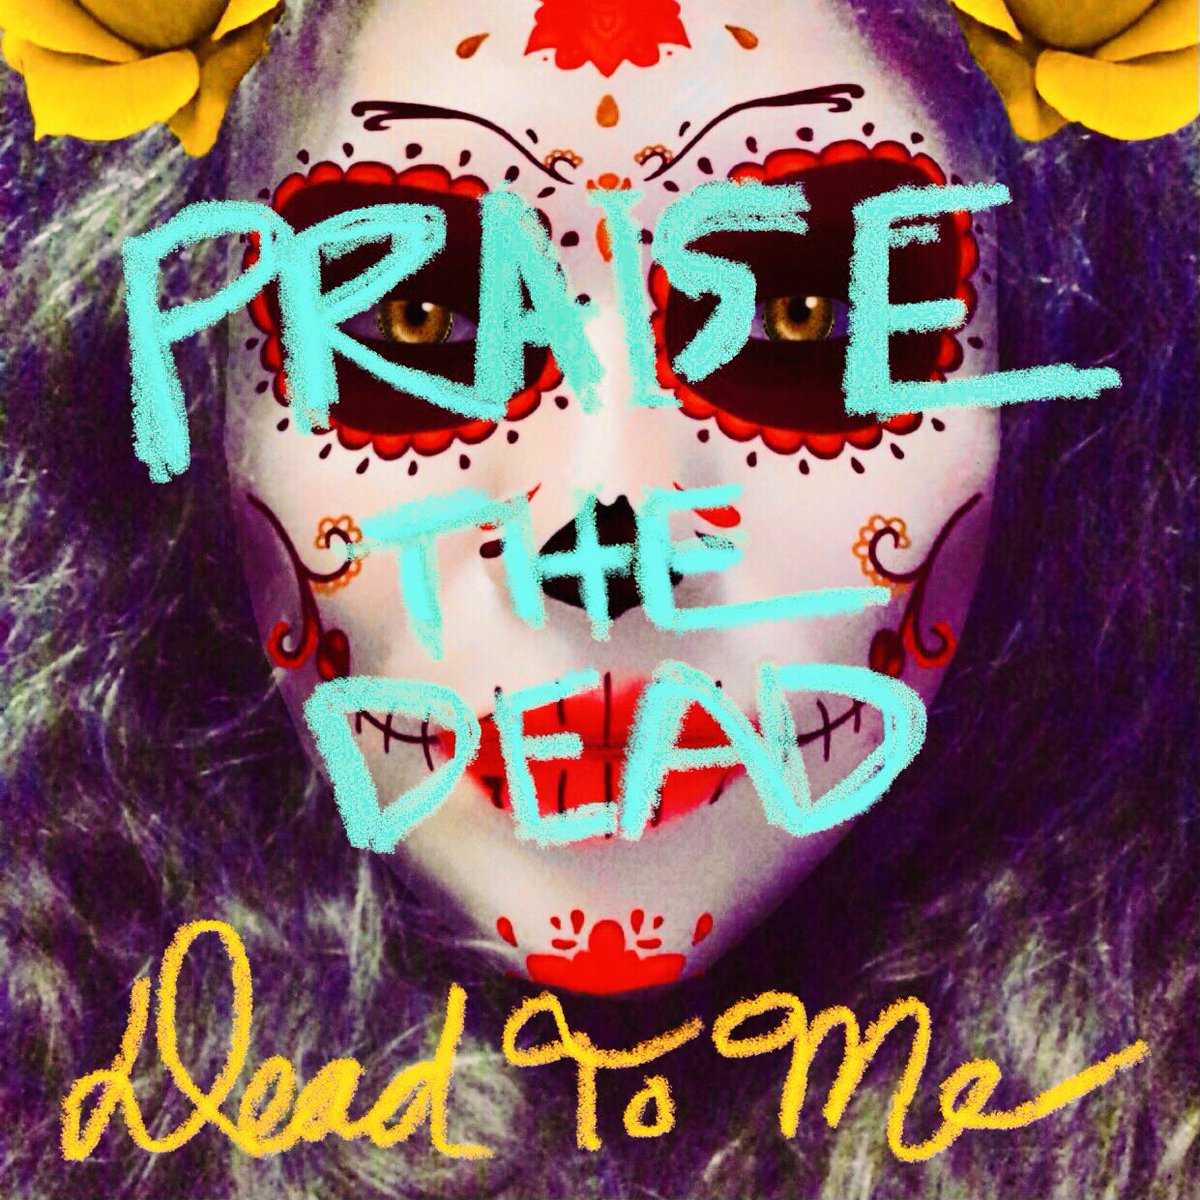 In honor of our 11/1 release date, Praise The Dead’s new single Dead To Me is available for a $1 download at praisethedead.bandcamp.com/track/dead-to-…   EEK!